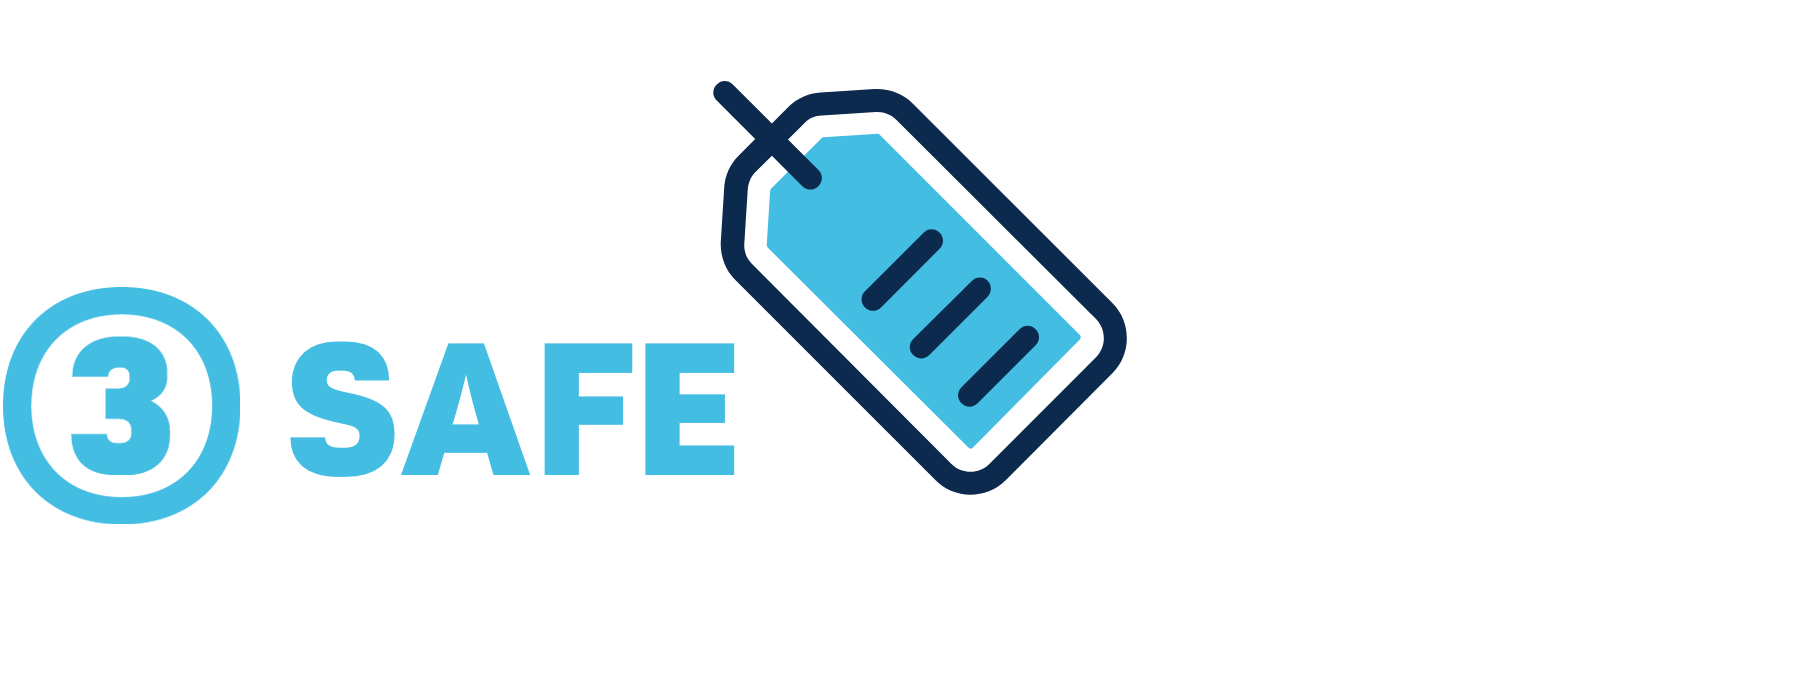 Safe In The Store